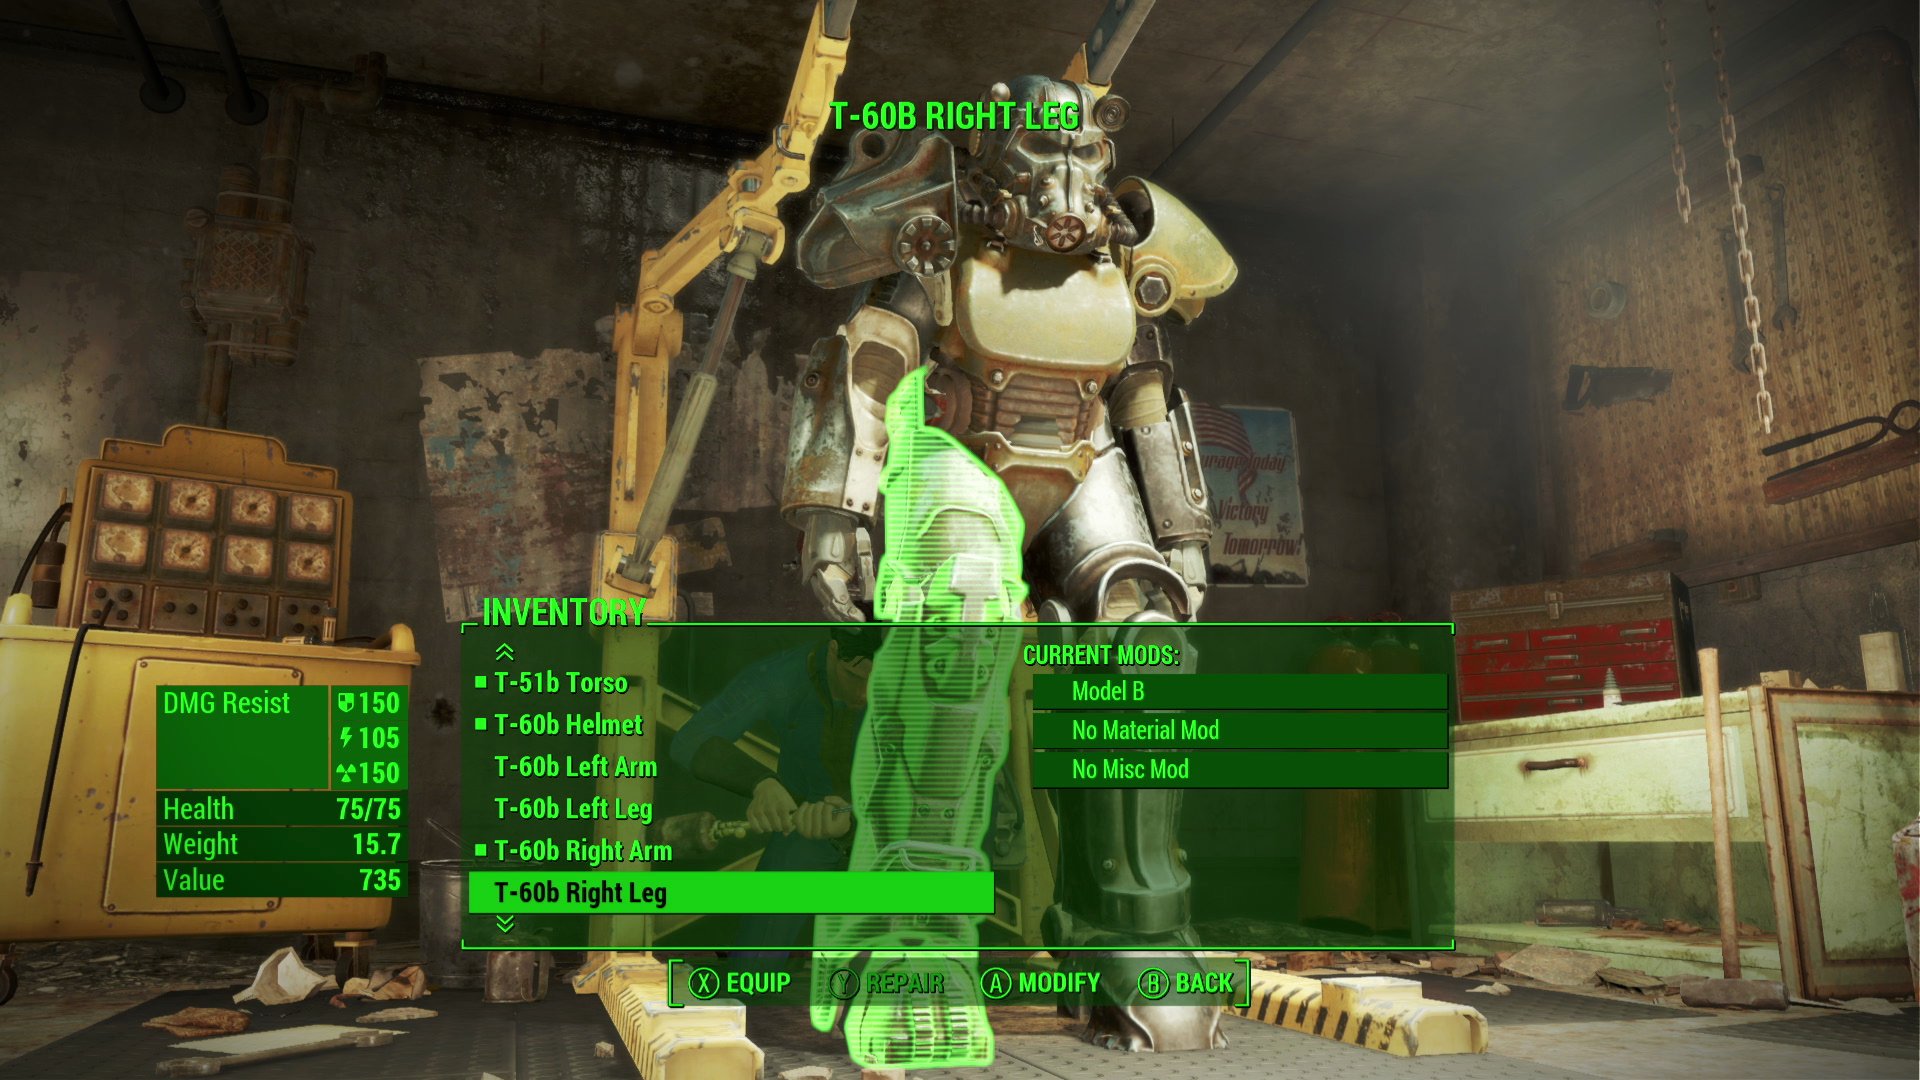 how to download fallout 3 for free on pc 2015